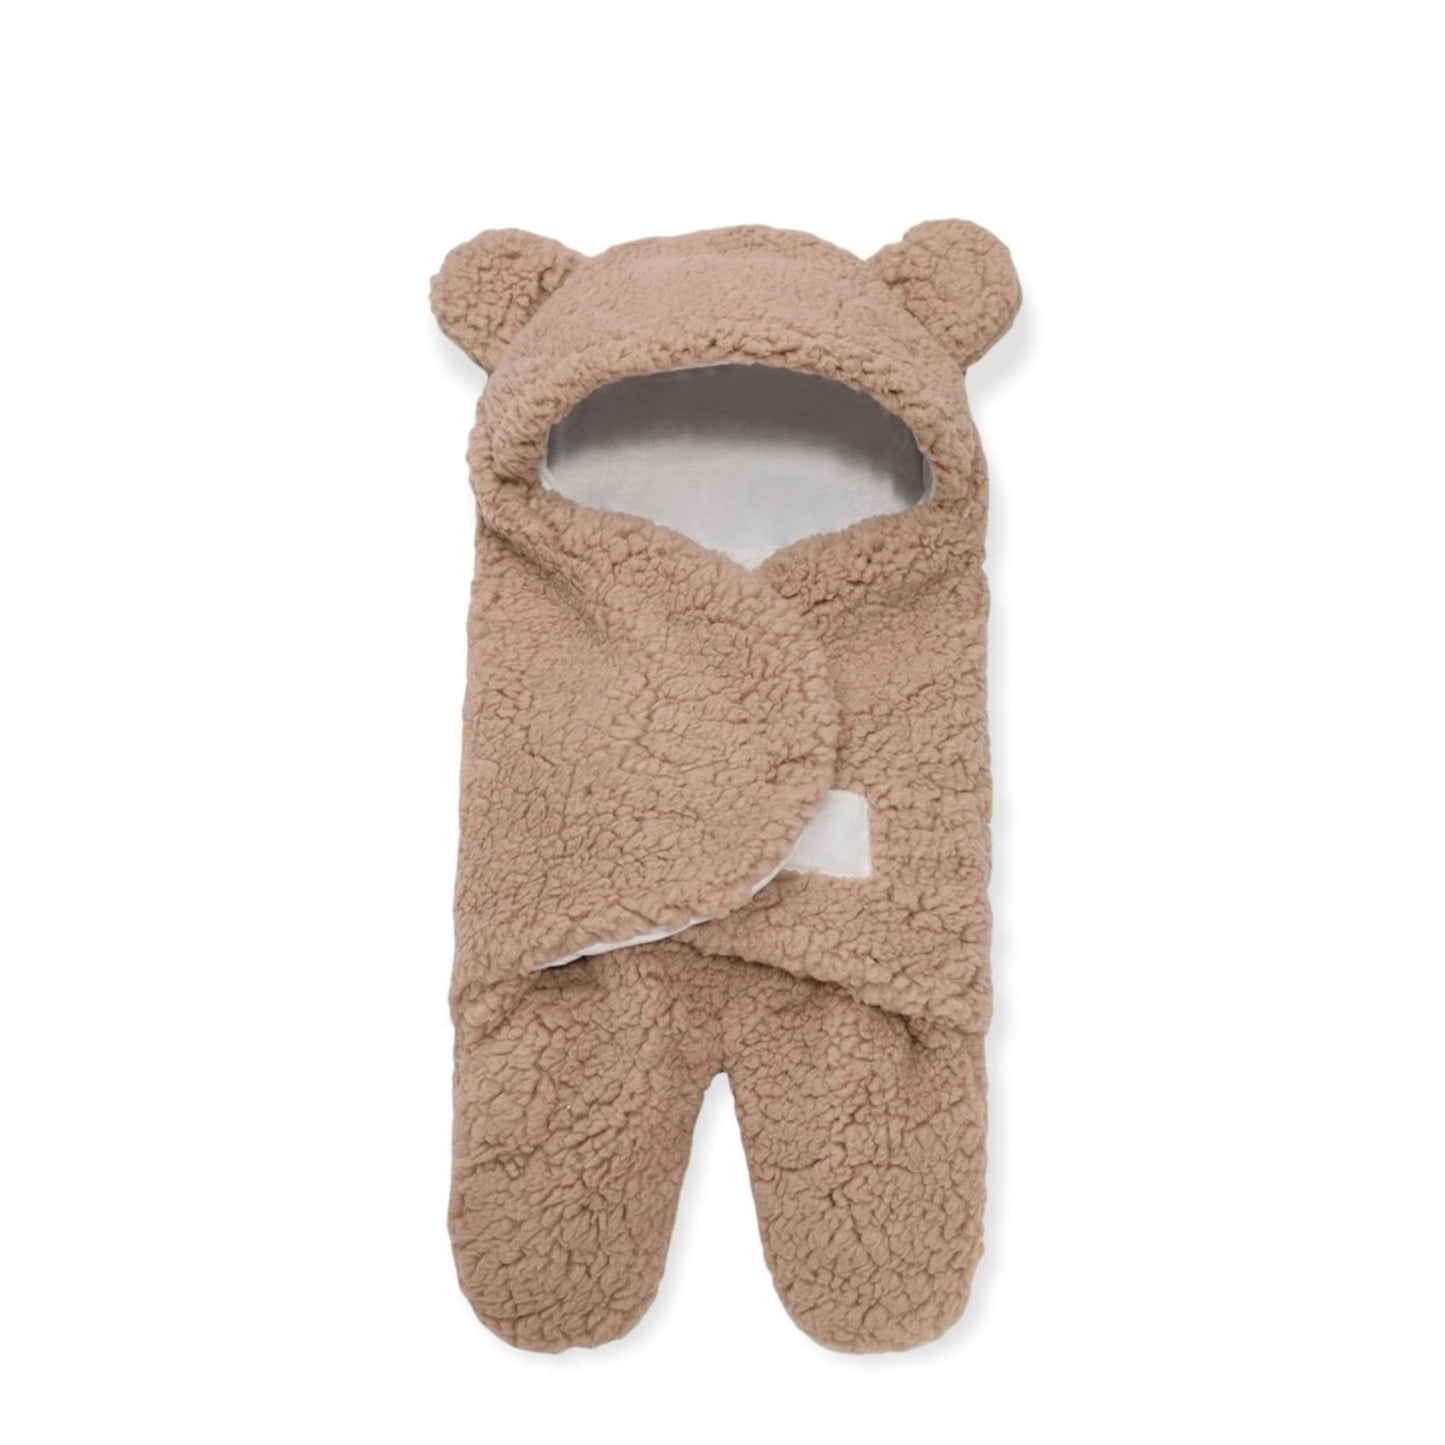 Light brown baby sleeping bag and swaddle for winter - hunny bubba kids